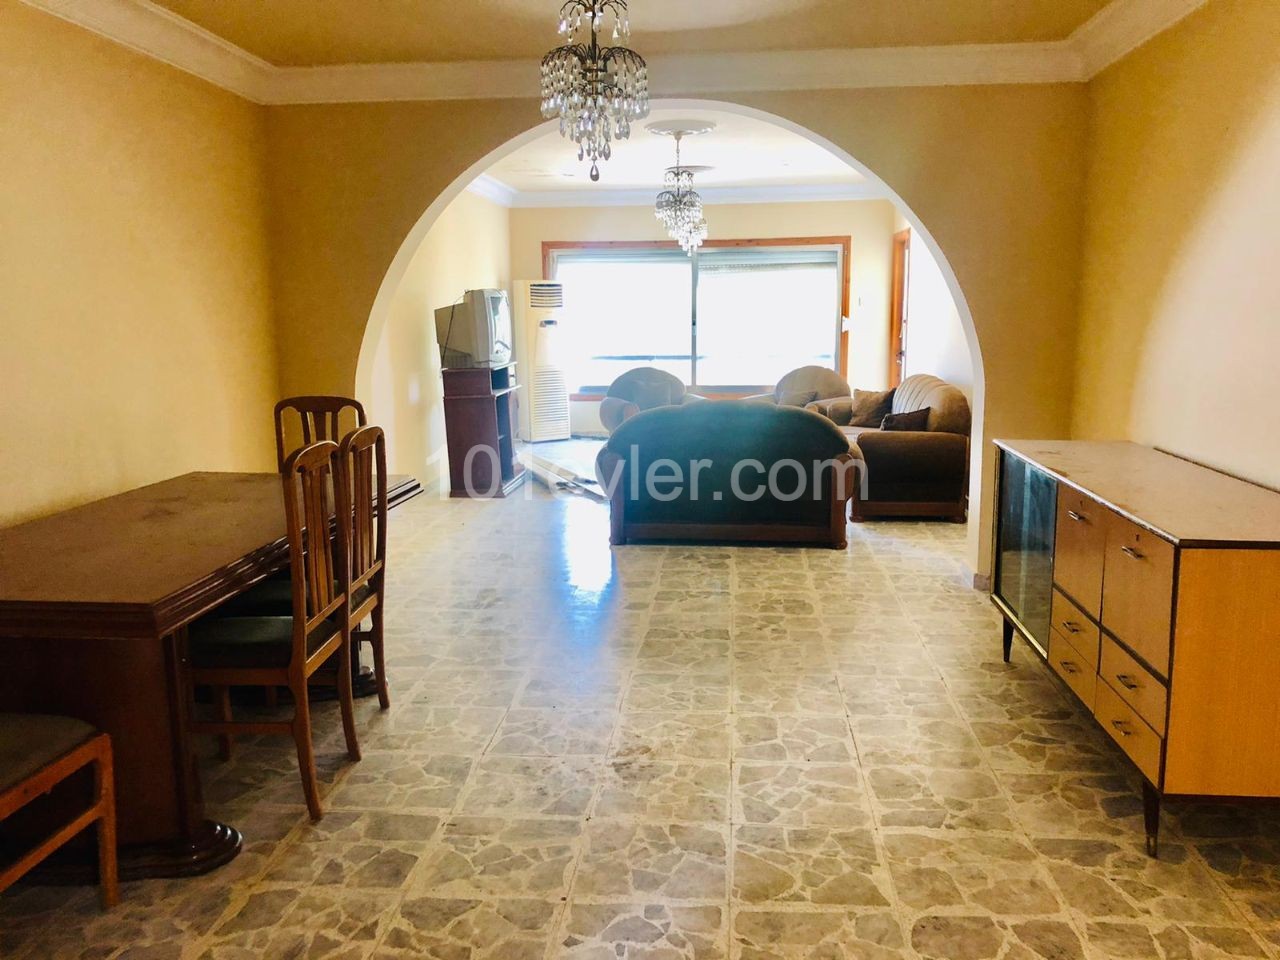 Spacious 3+1 furnished flat for sale in Upper Kyrenia.